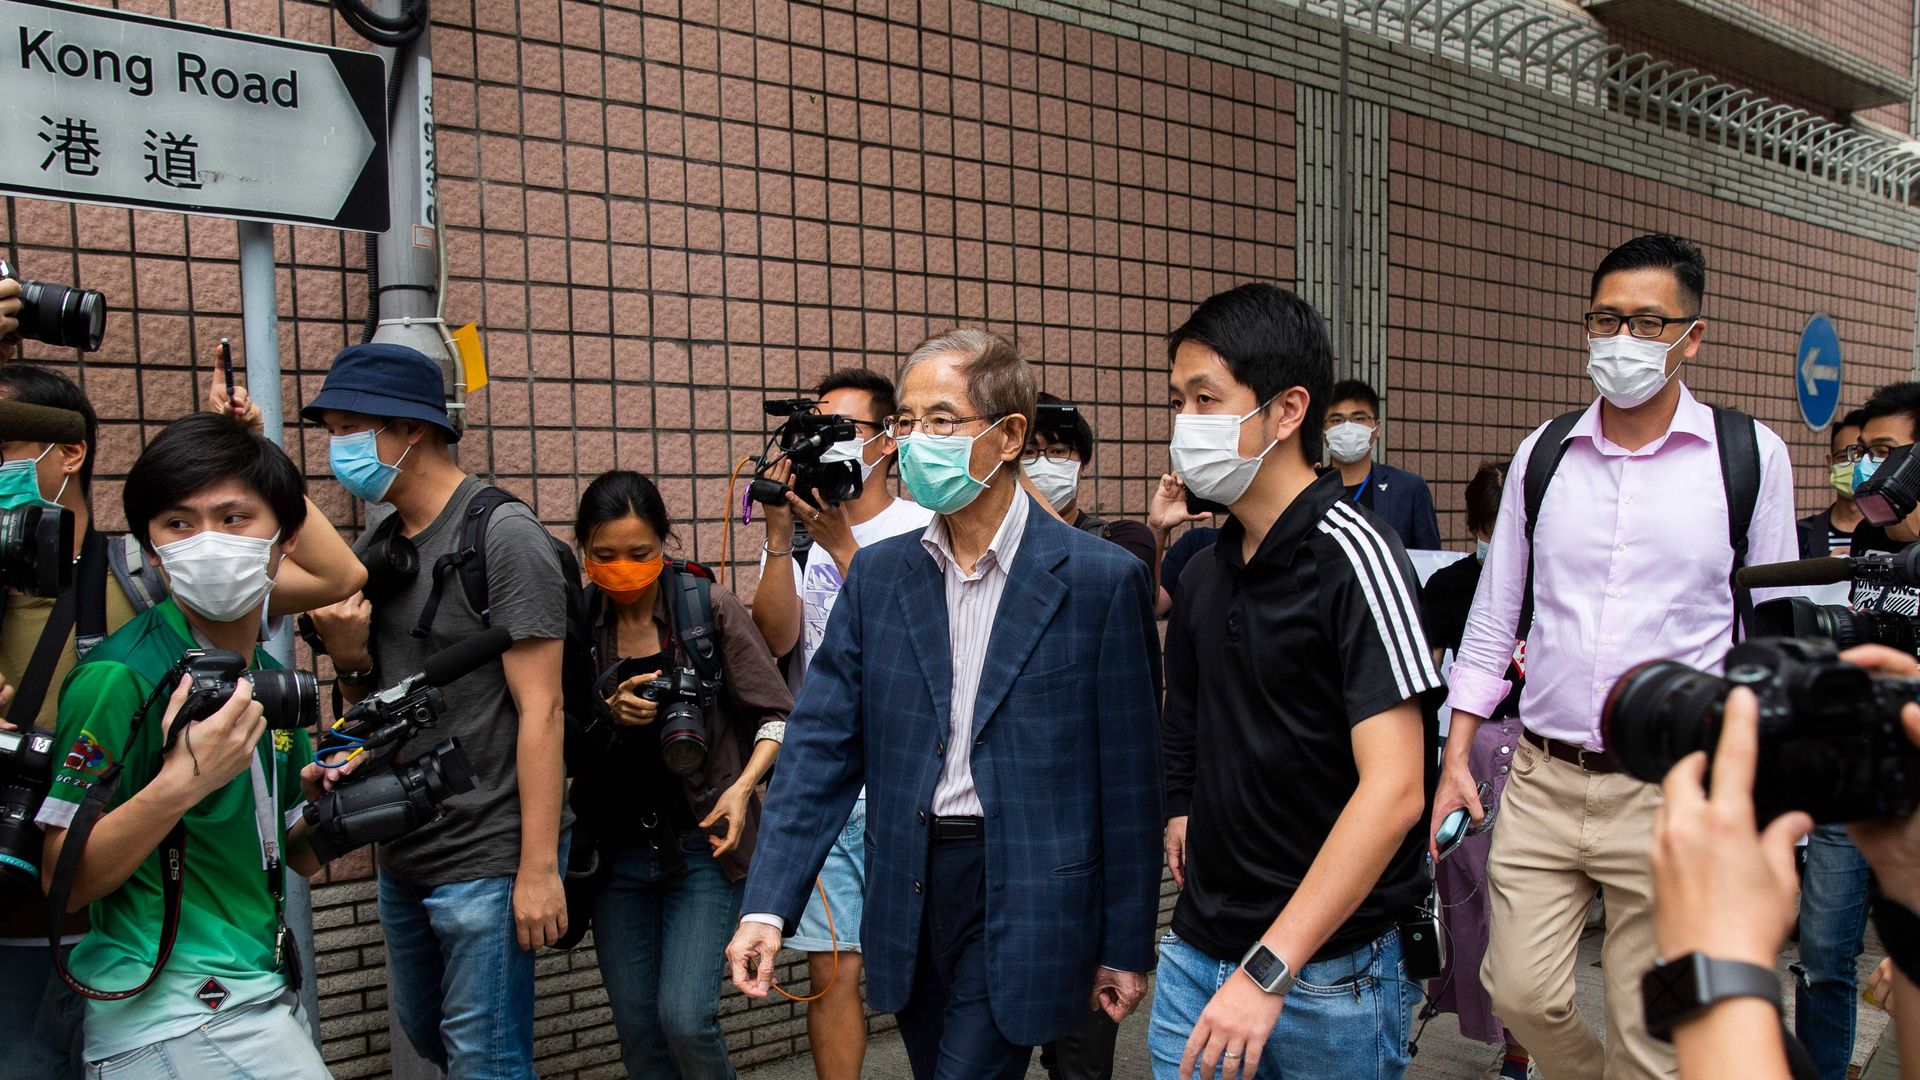 Former lawmaker and pro-democracy activist Martin Lee (C) leaves the Central District police station in Hong Kong